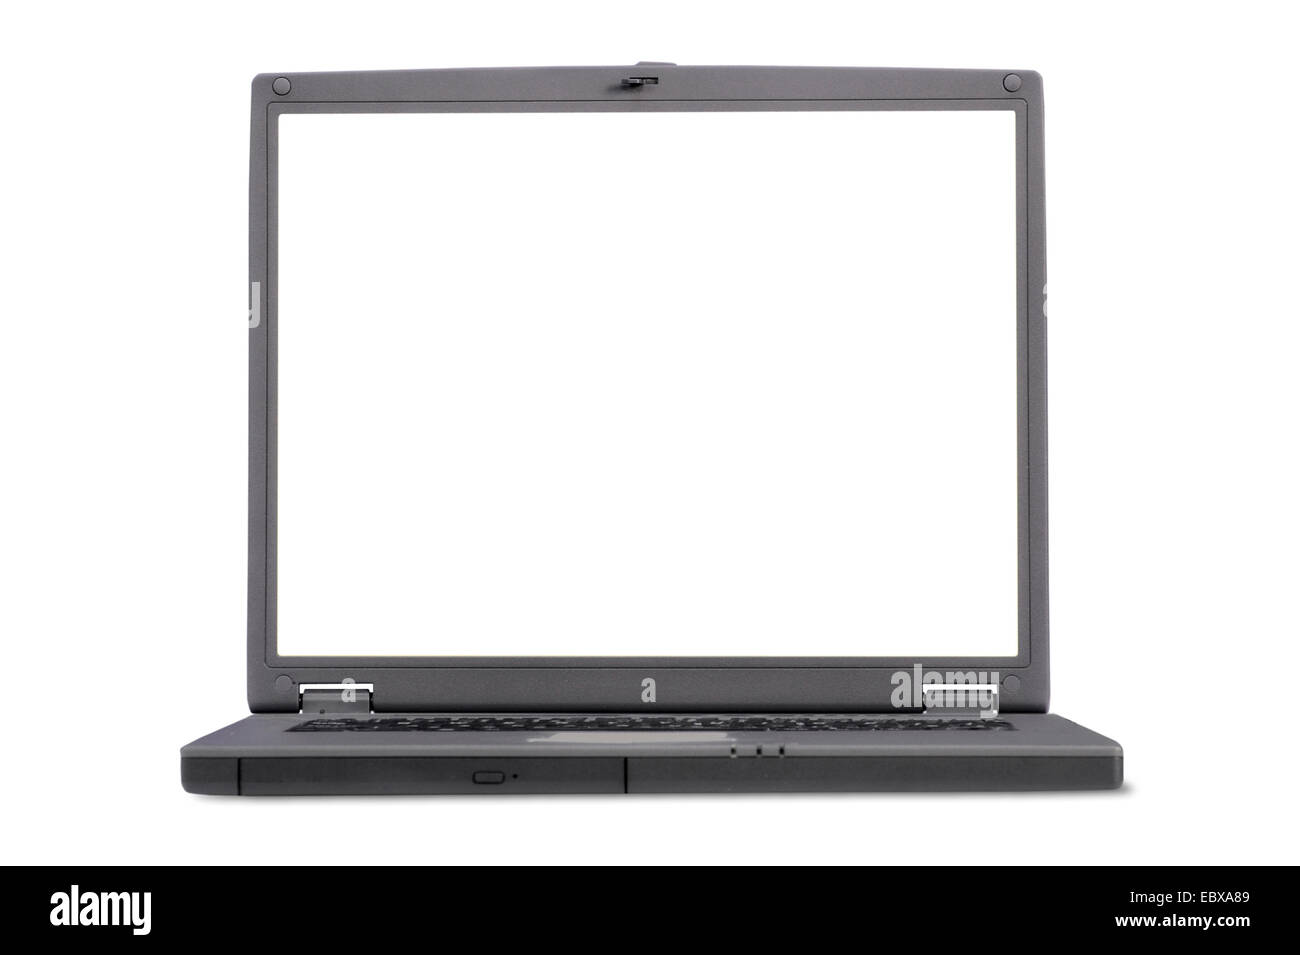 laptop view from the front with space for writing or placing your own image Stock Photo